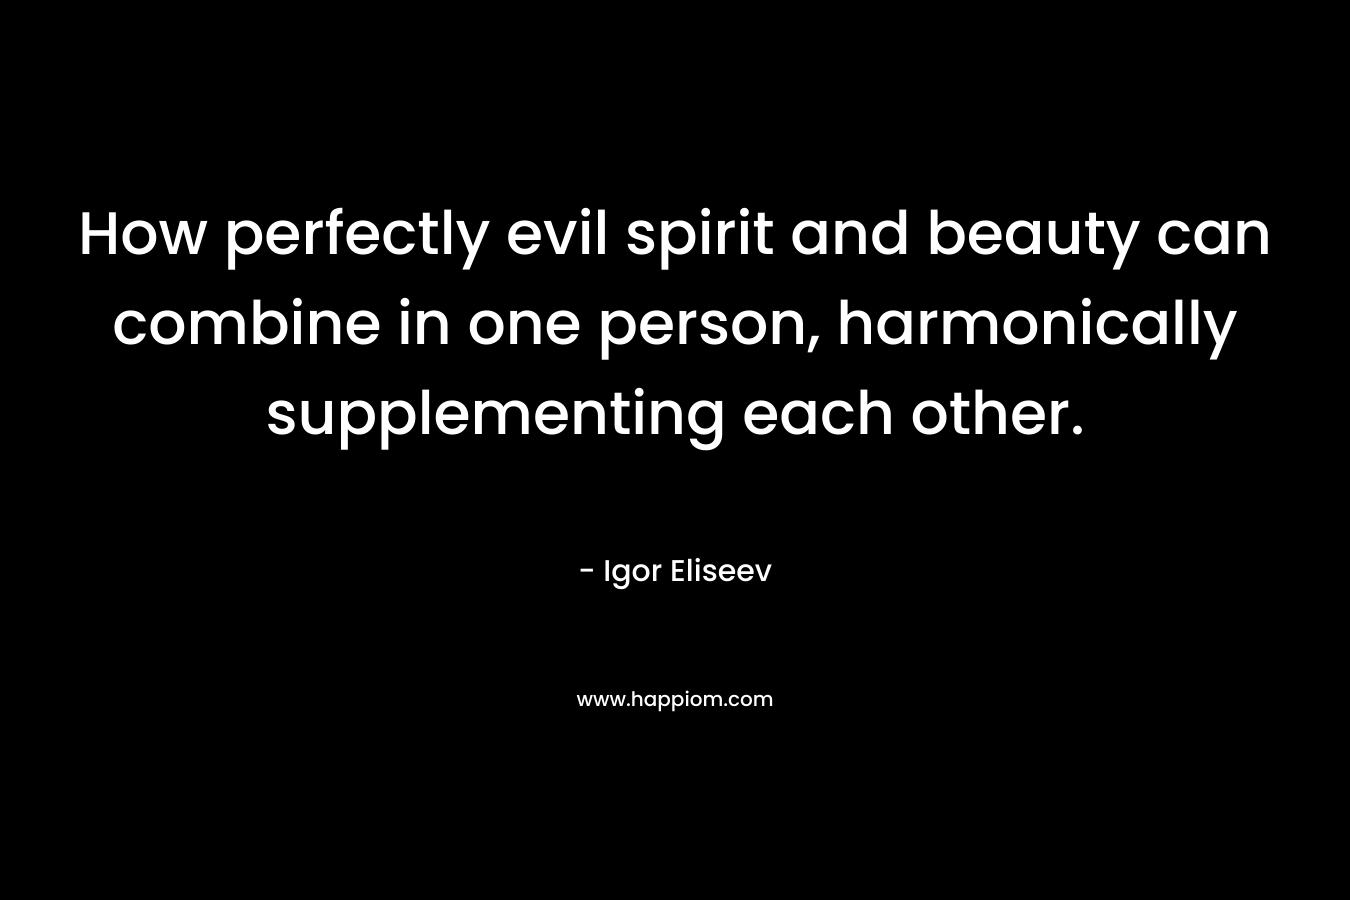 How perfectly evil spirit and beauty can combine in one person, harmonically supplementing each other.